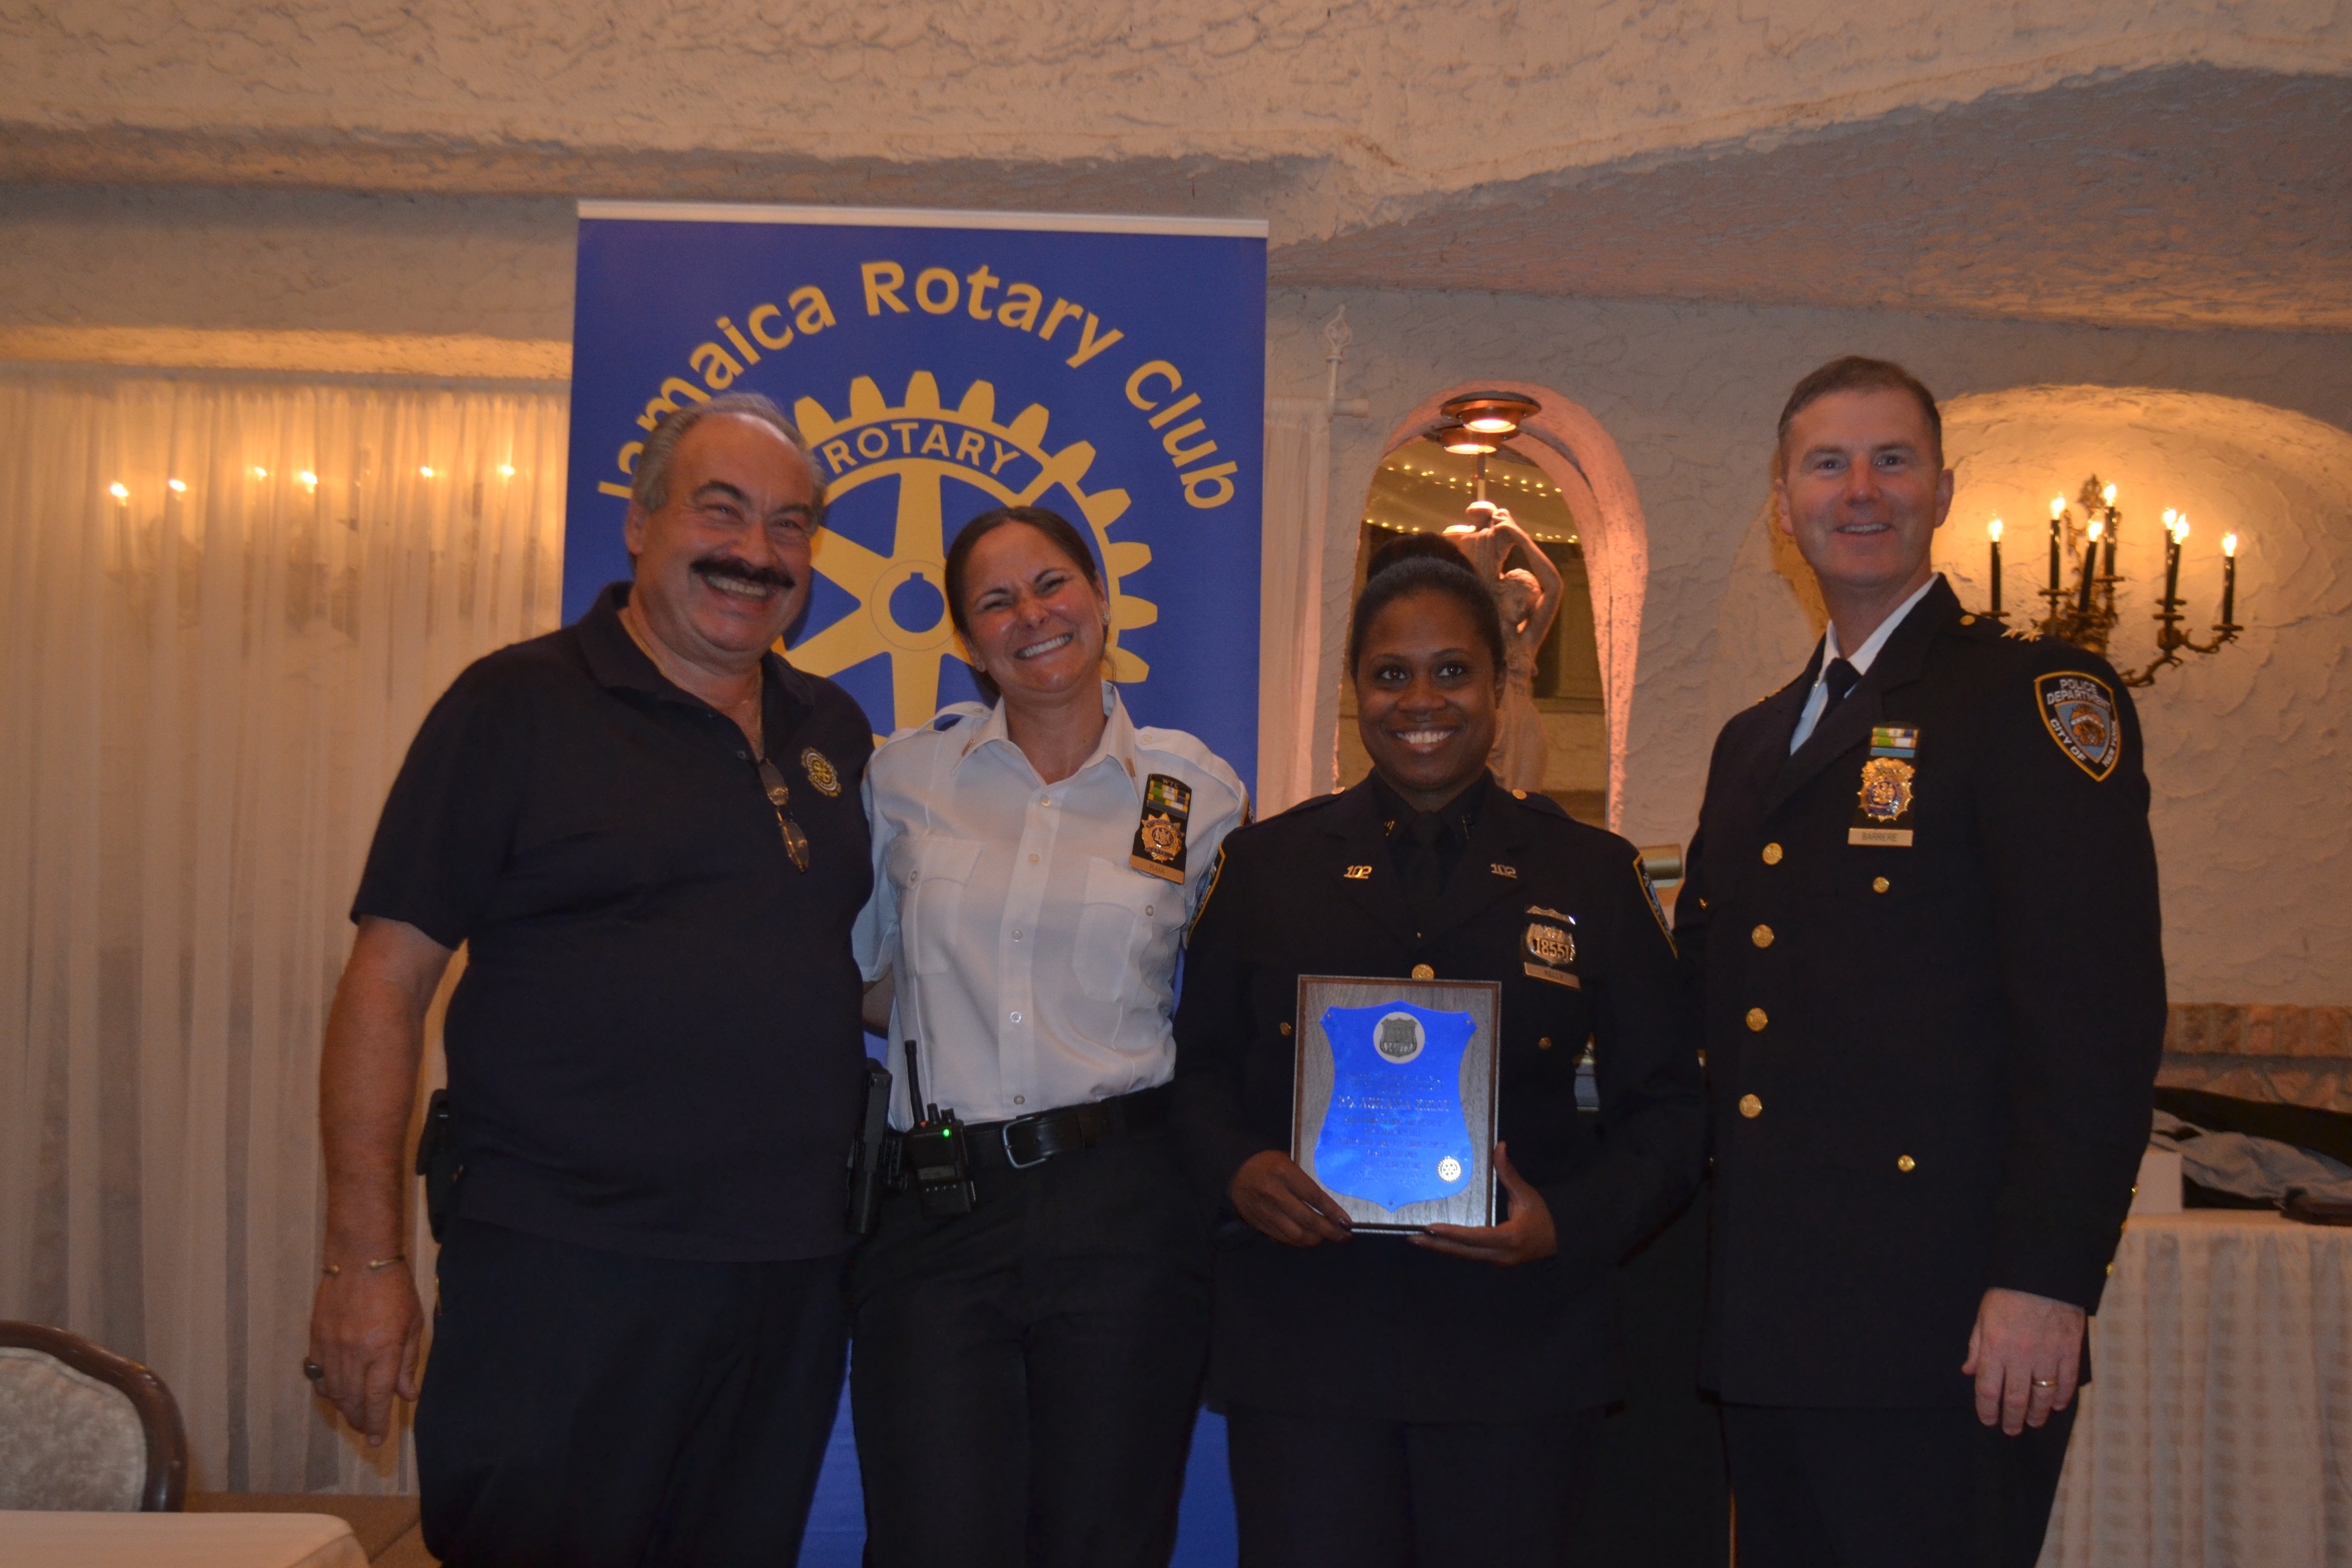 P.O. Ashana Kelly from the 102nd Precinct was honored for her role in catching a repeat robbery offender. (From left: Joe Iaboni, Executive Officer Danielle Reyes, P.O. Ashana Kelly and Commanding Officer of Queens South David Barrere)